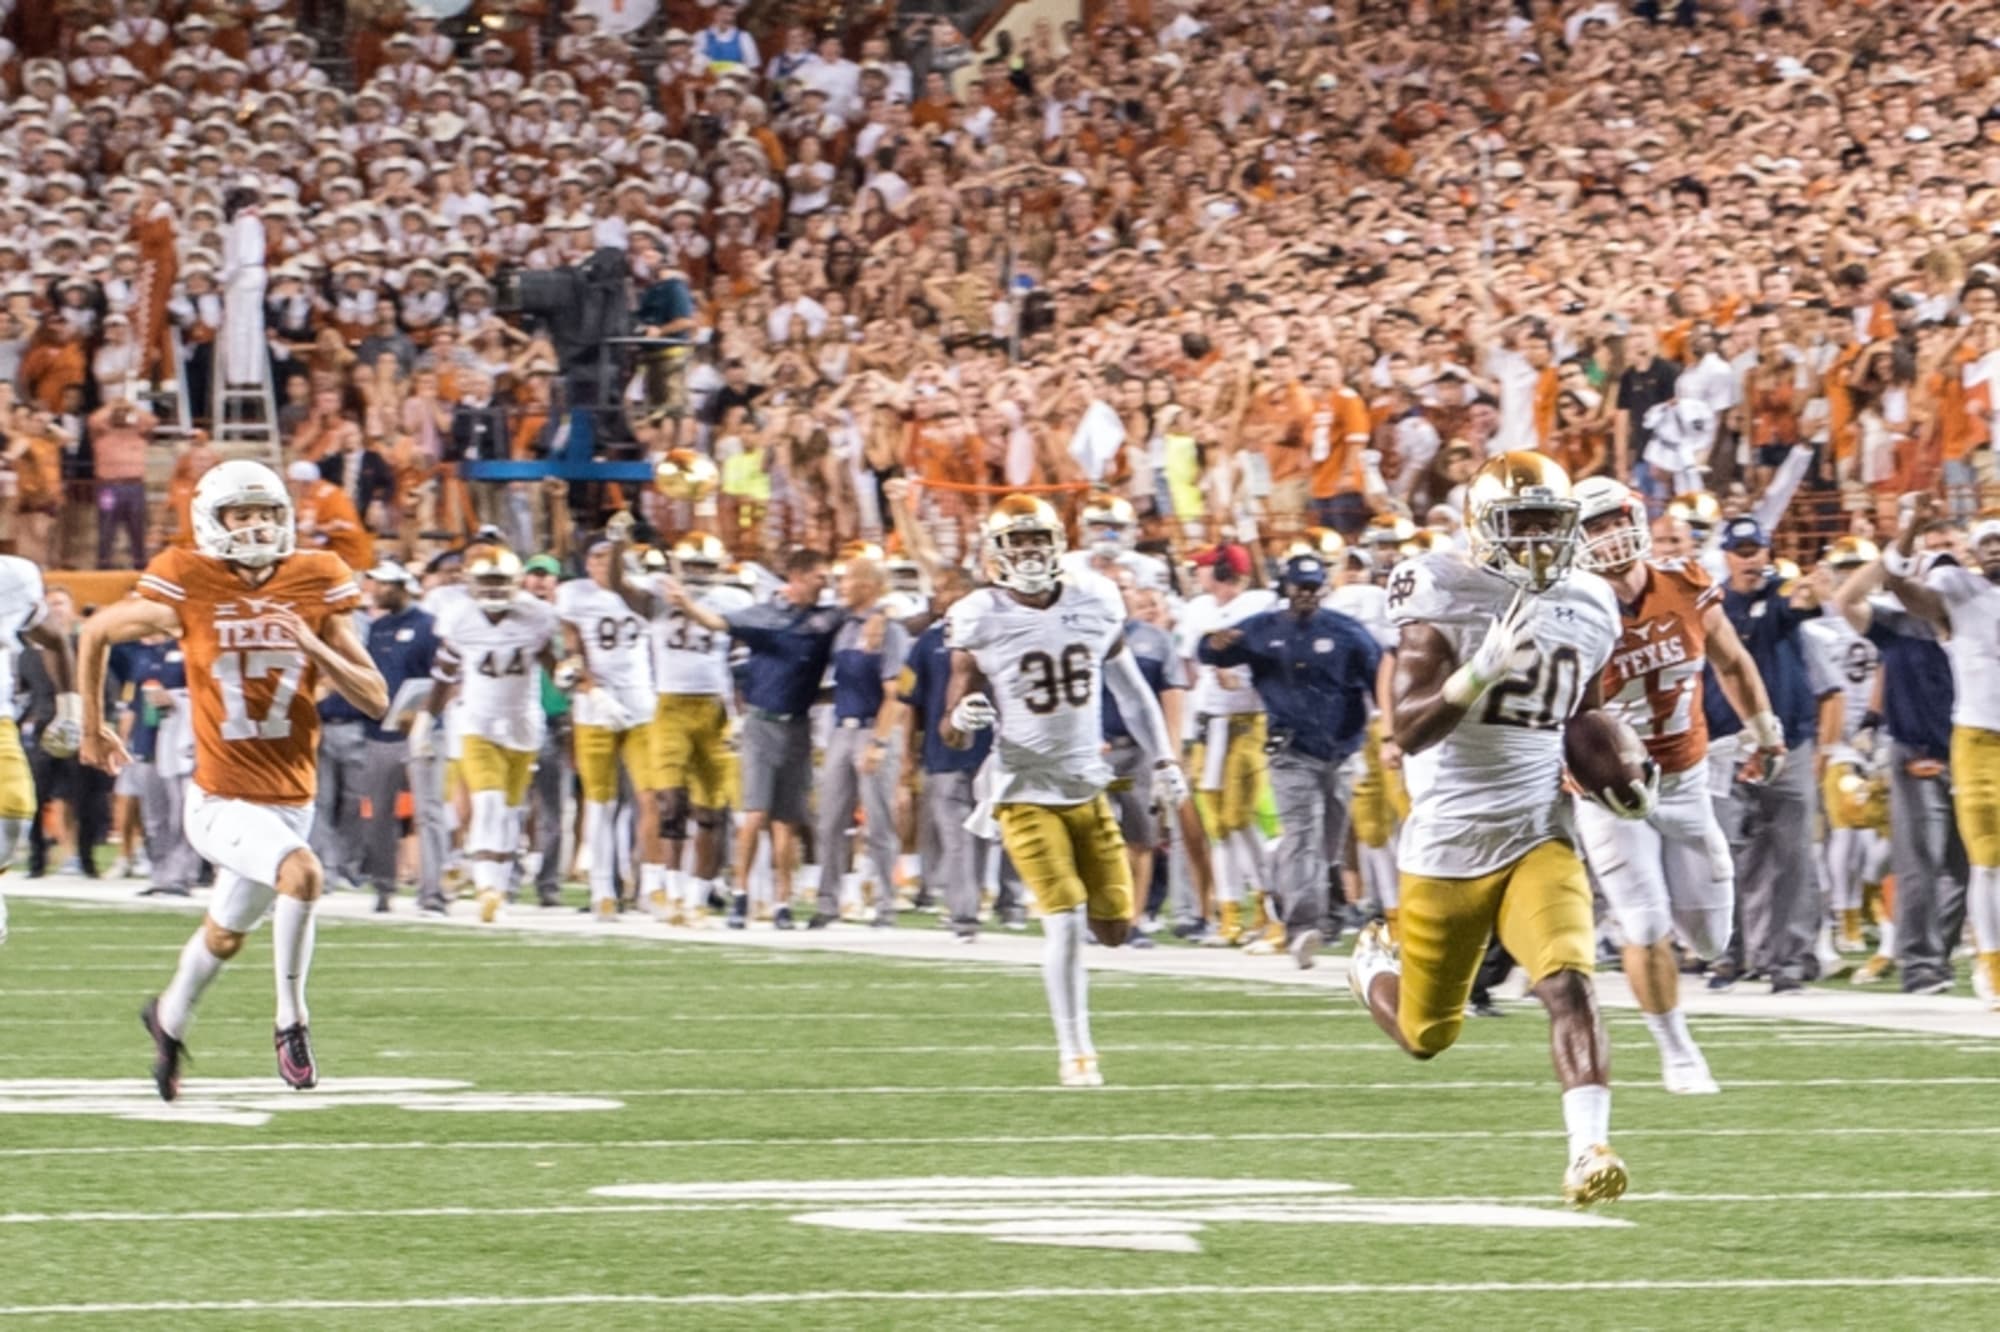 Notre Dame Football: Top 10 Images of the 2016 Season